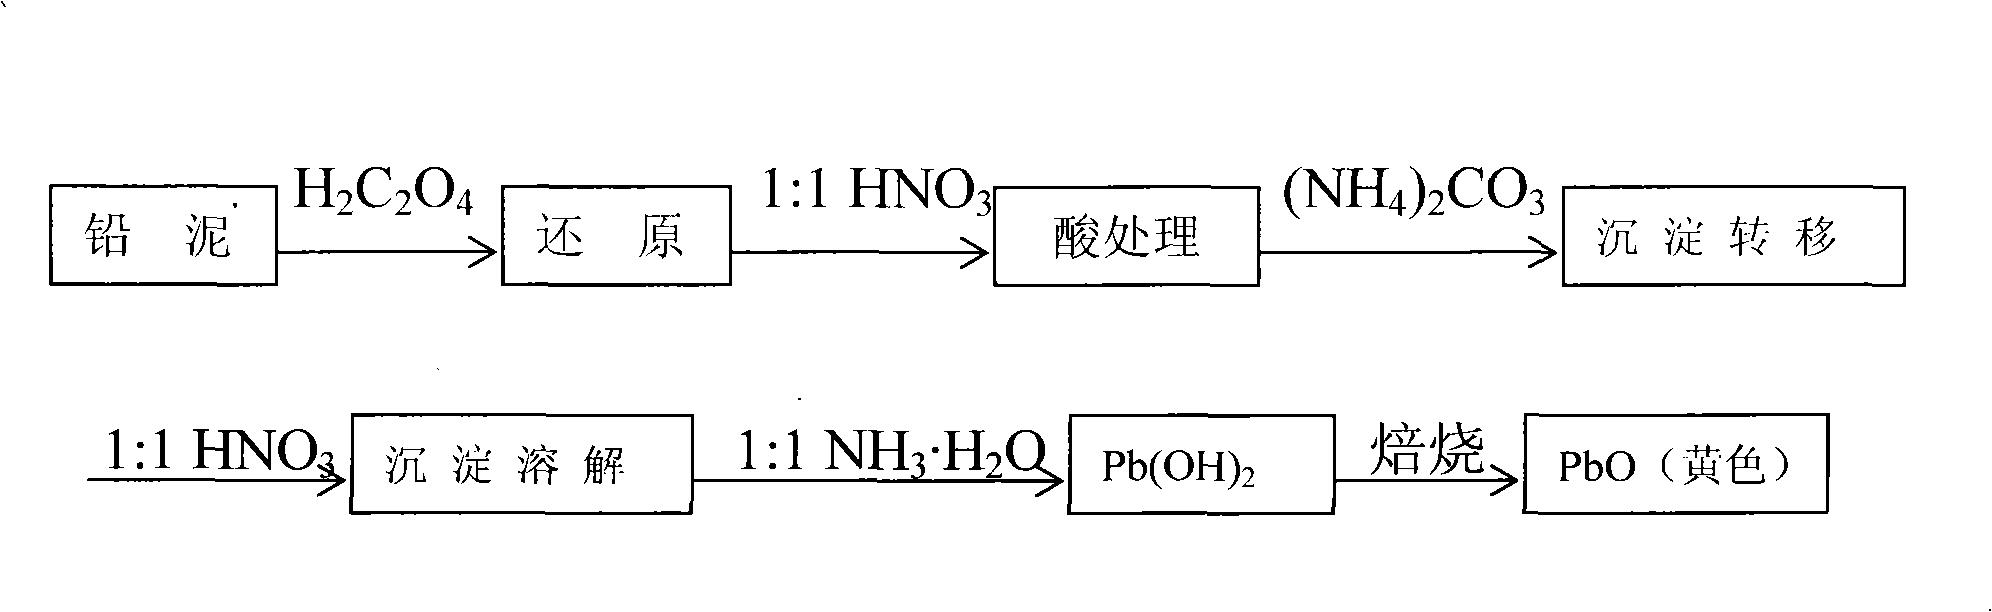 Method for recovering lead oxide by waste lead-acid storage battery